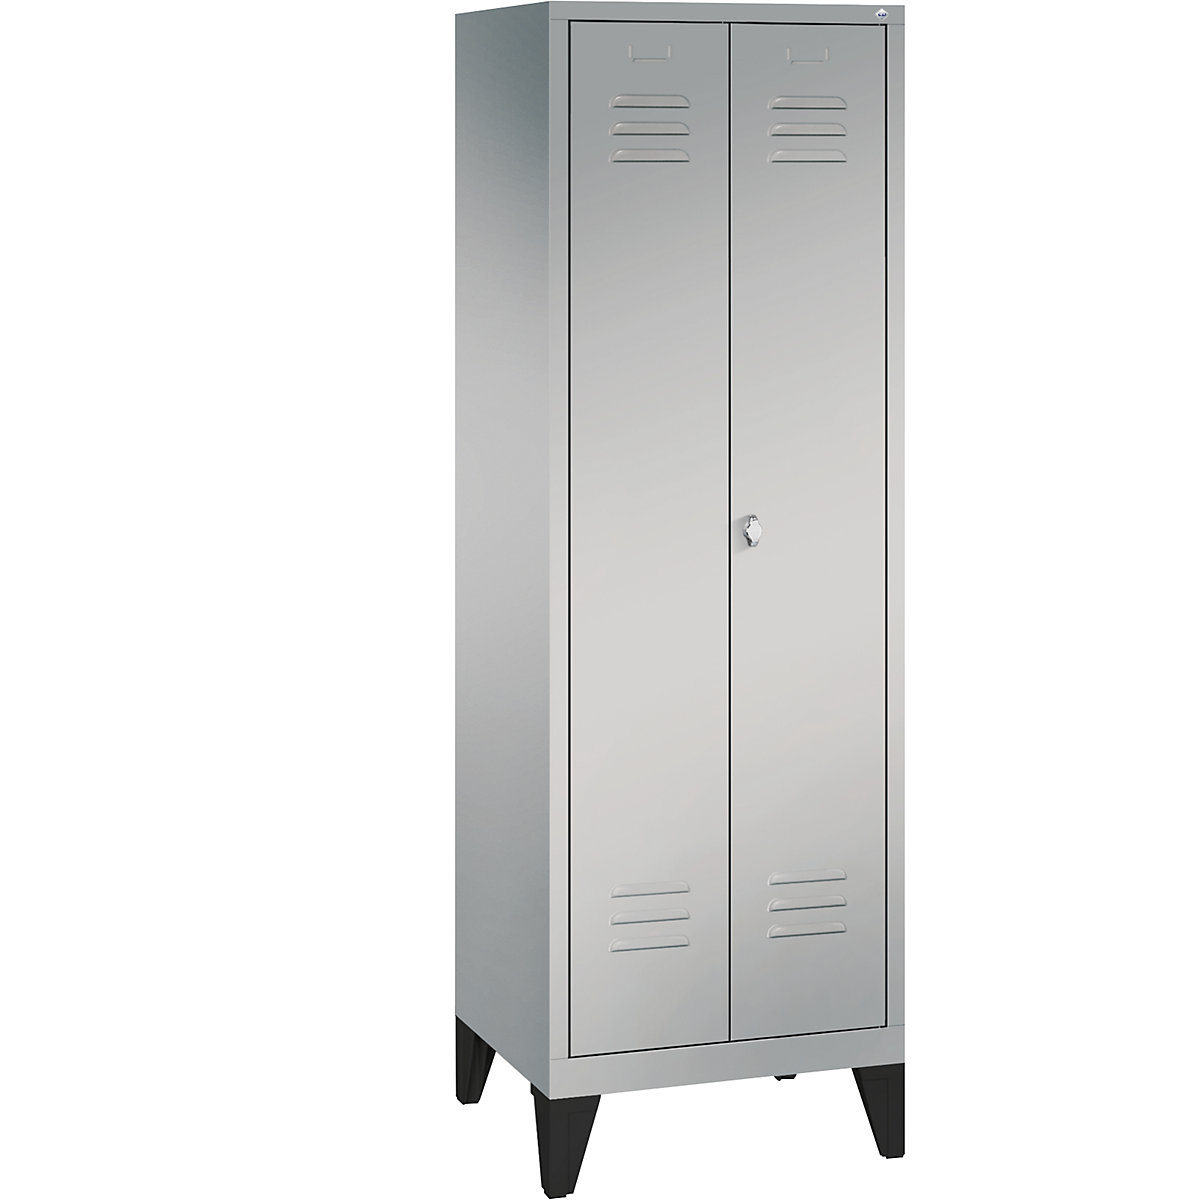 CLASSIC cloakroom locker with feet, doors close in the middle – C+P